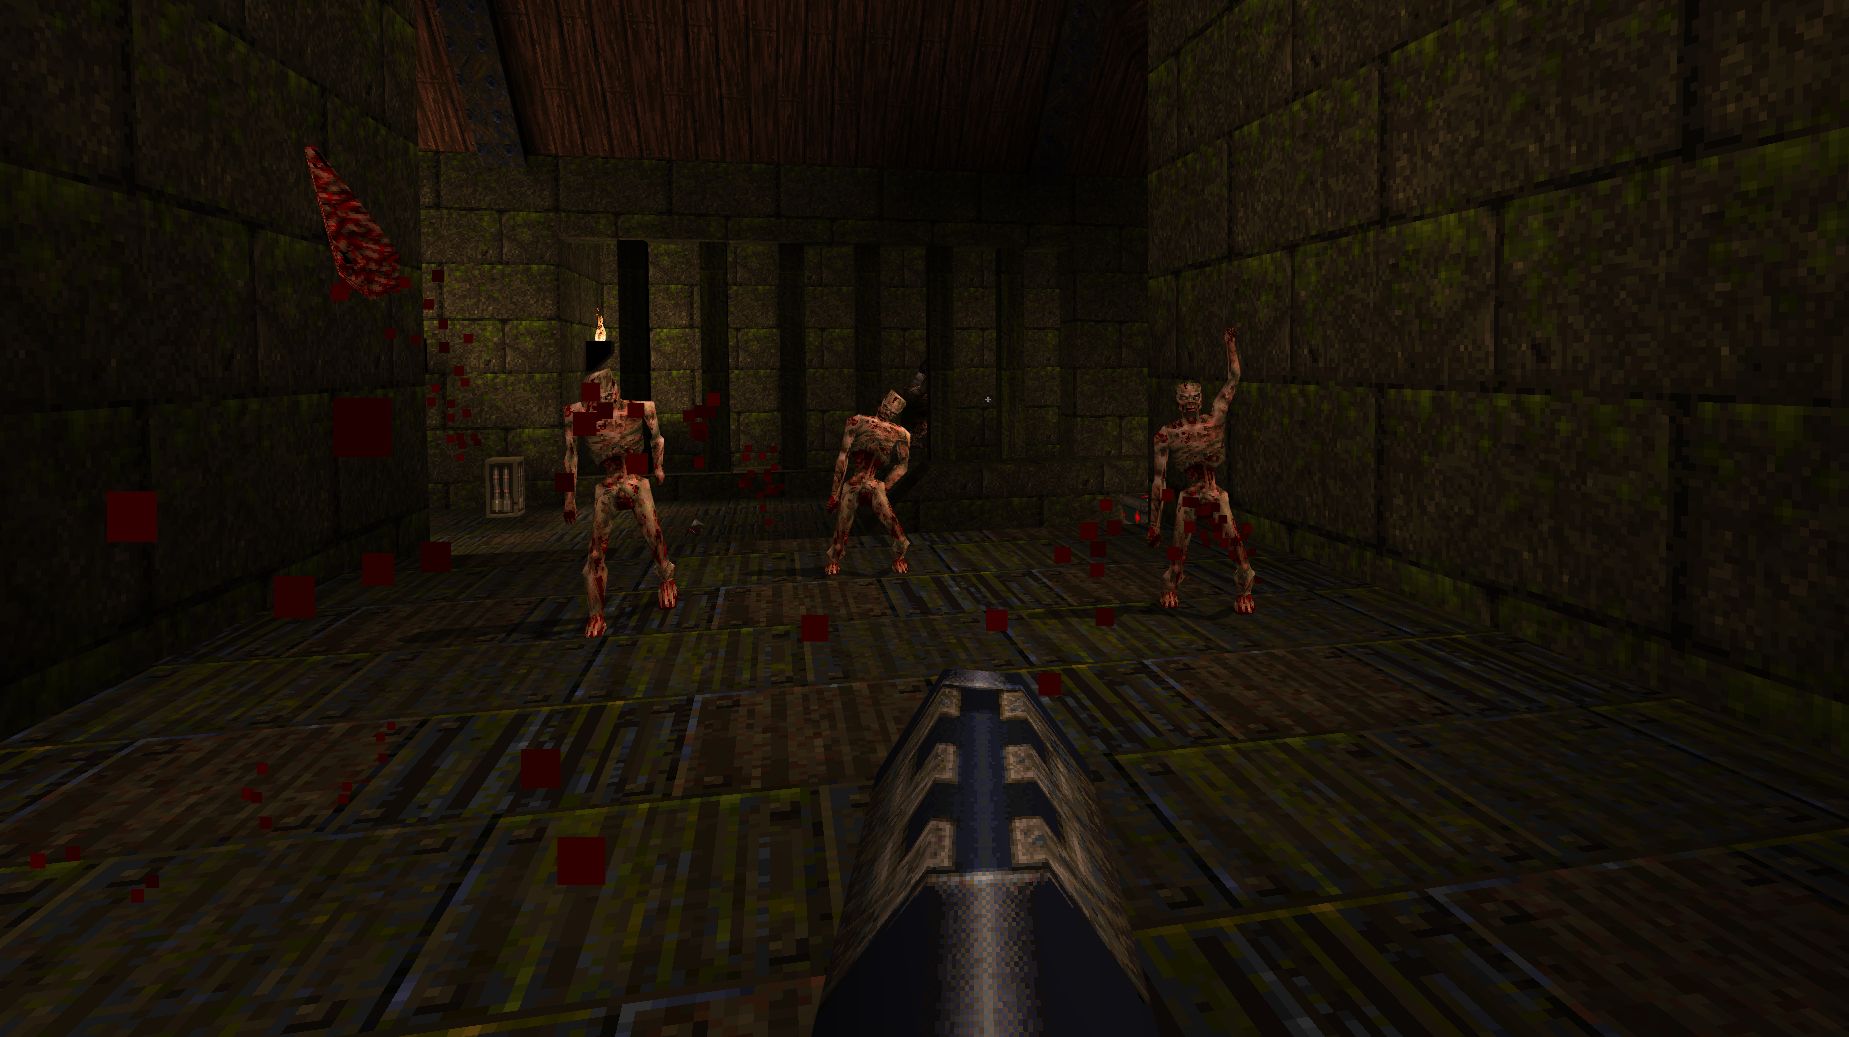 Three zombies approach the player in Quake